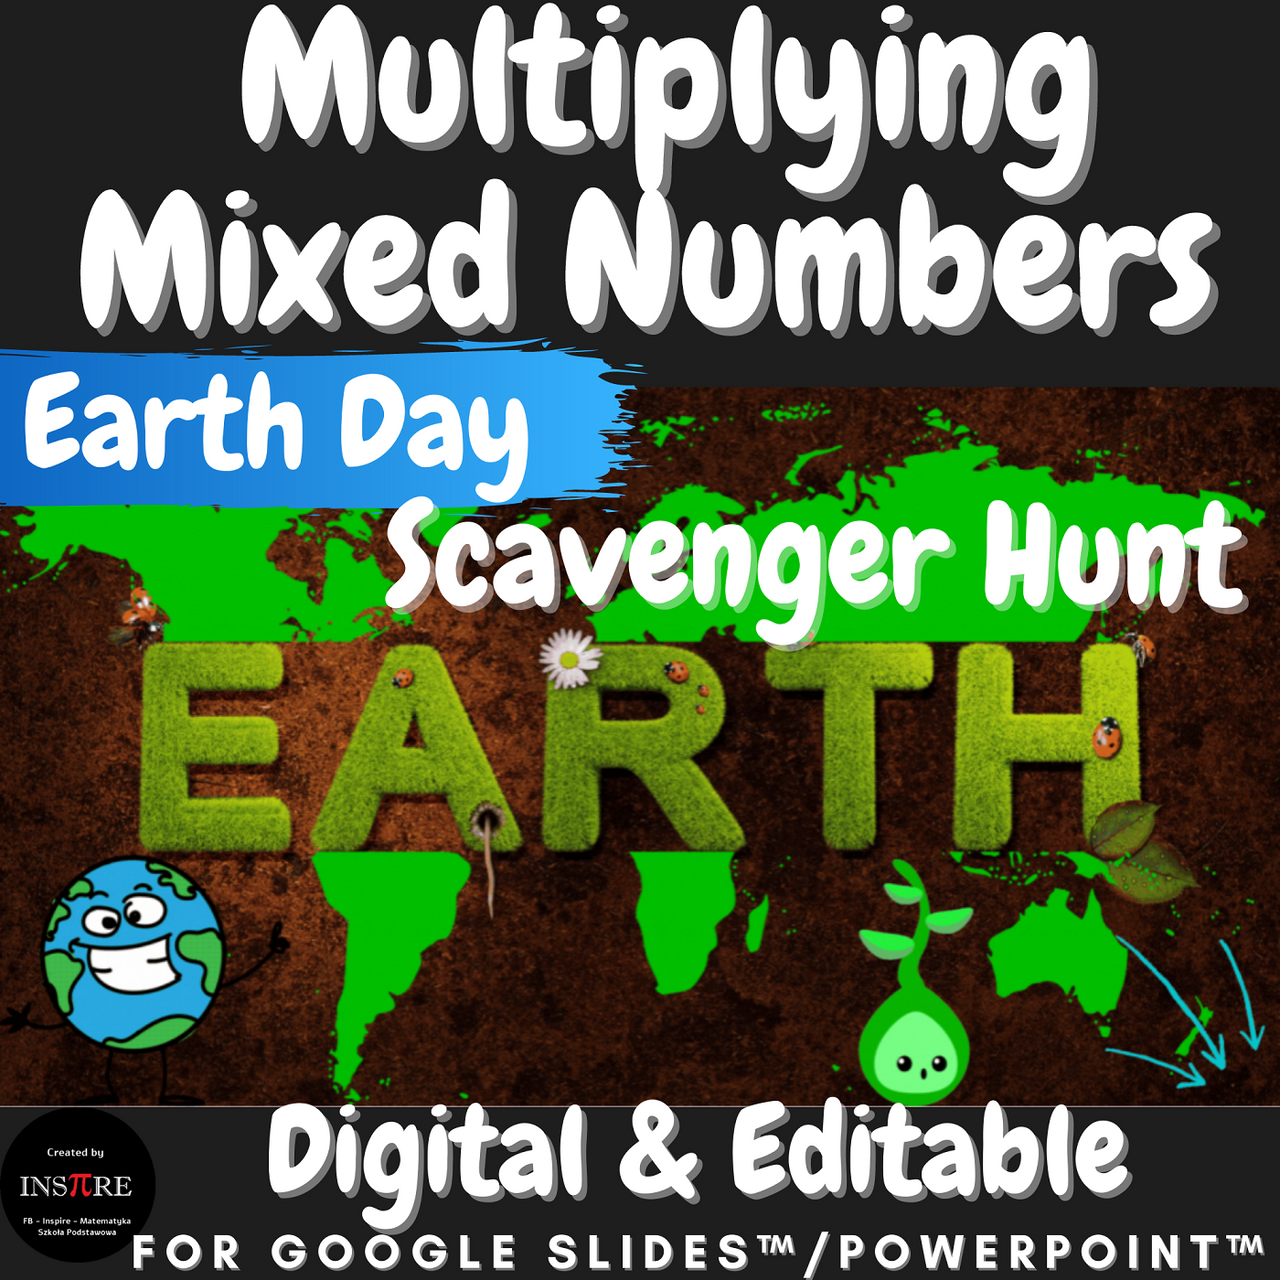 Multiplying Mixed Numbers Earth Day Scavenger Hunt Around the World Escape Room